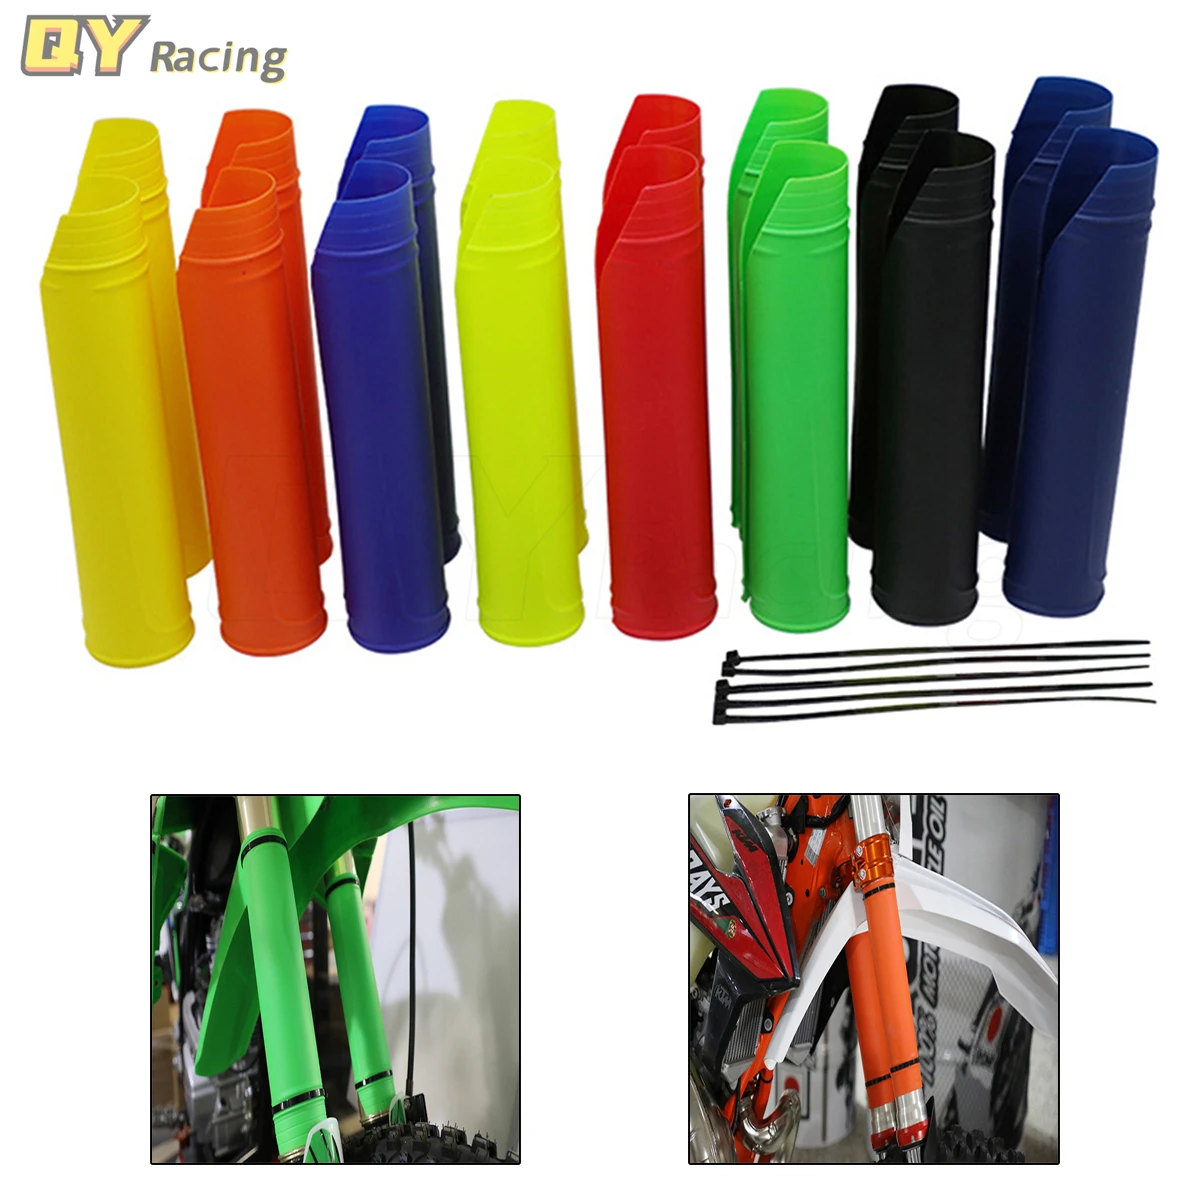 Upper Fork Guard Protector Covers for KTM EXC SXF SX XC SXS XCW XCF Six Days SMR SMC 105 125 150 200 250 300 350 400 450 500 525